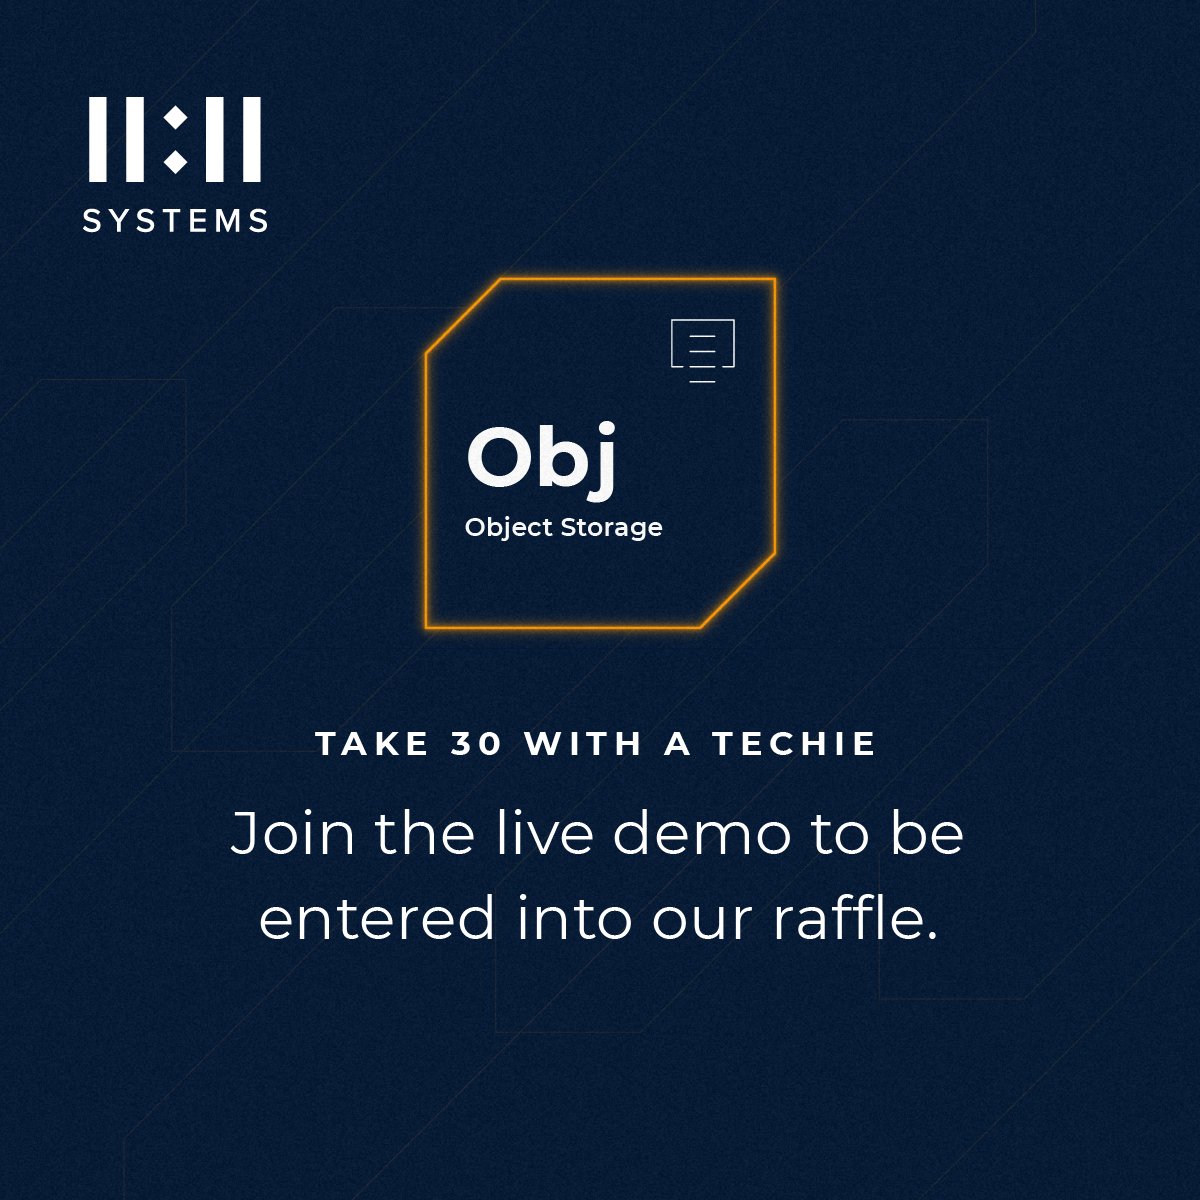 On Wednesday, April 17 at 11:00 AM CDT, join our Take 30 with a Techie demo series for a 30-minute demo of 11:11 Cloud Object Storage and see the 11:11 Cloud Console in action. Learn more and register for the North America session: 1111systems.com/demo-obj-stor-…